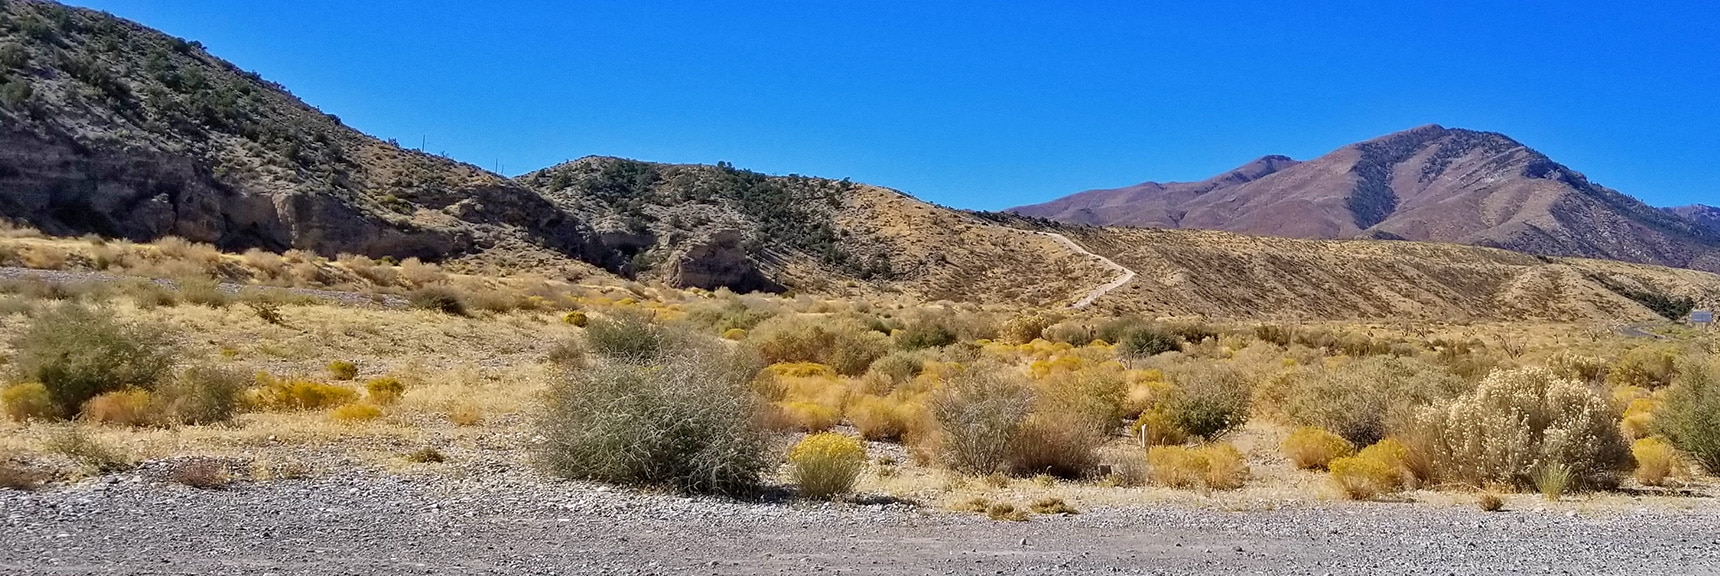 Departure Area from Kyle Canyon Rd to Harris Springs Canyon | Harris Springs Canyon | Biking from Centennial Hills | Spring Mountains, Nevada